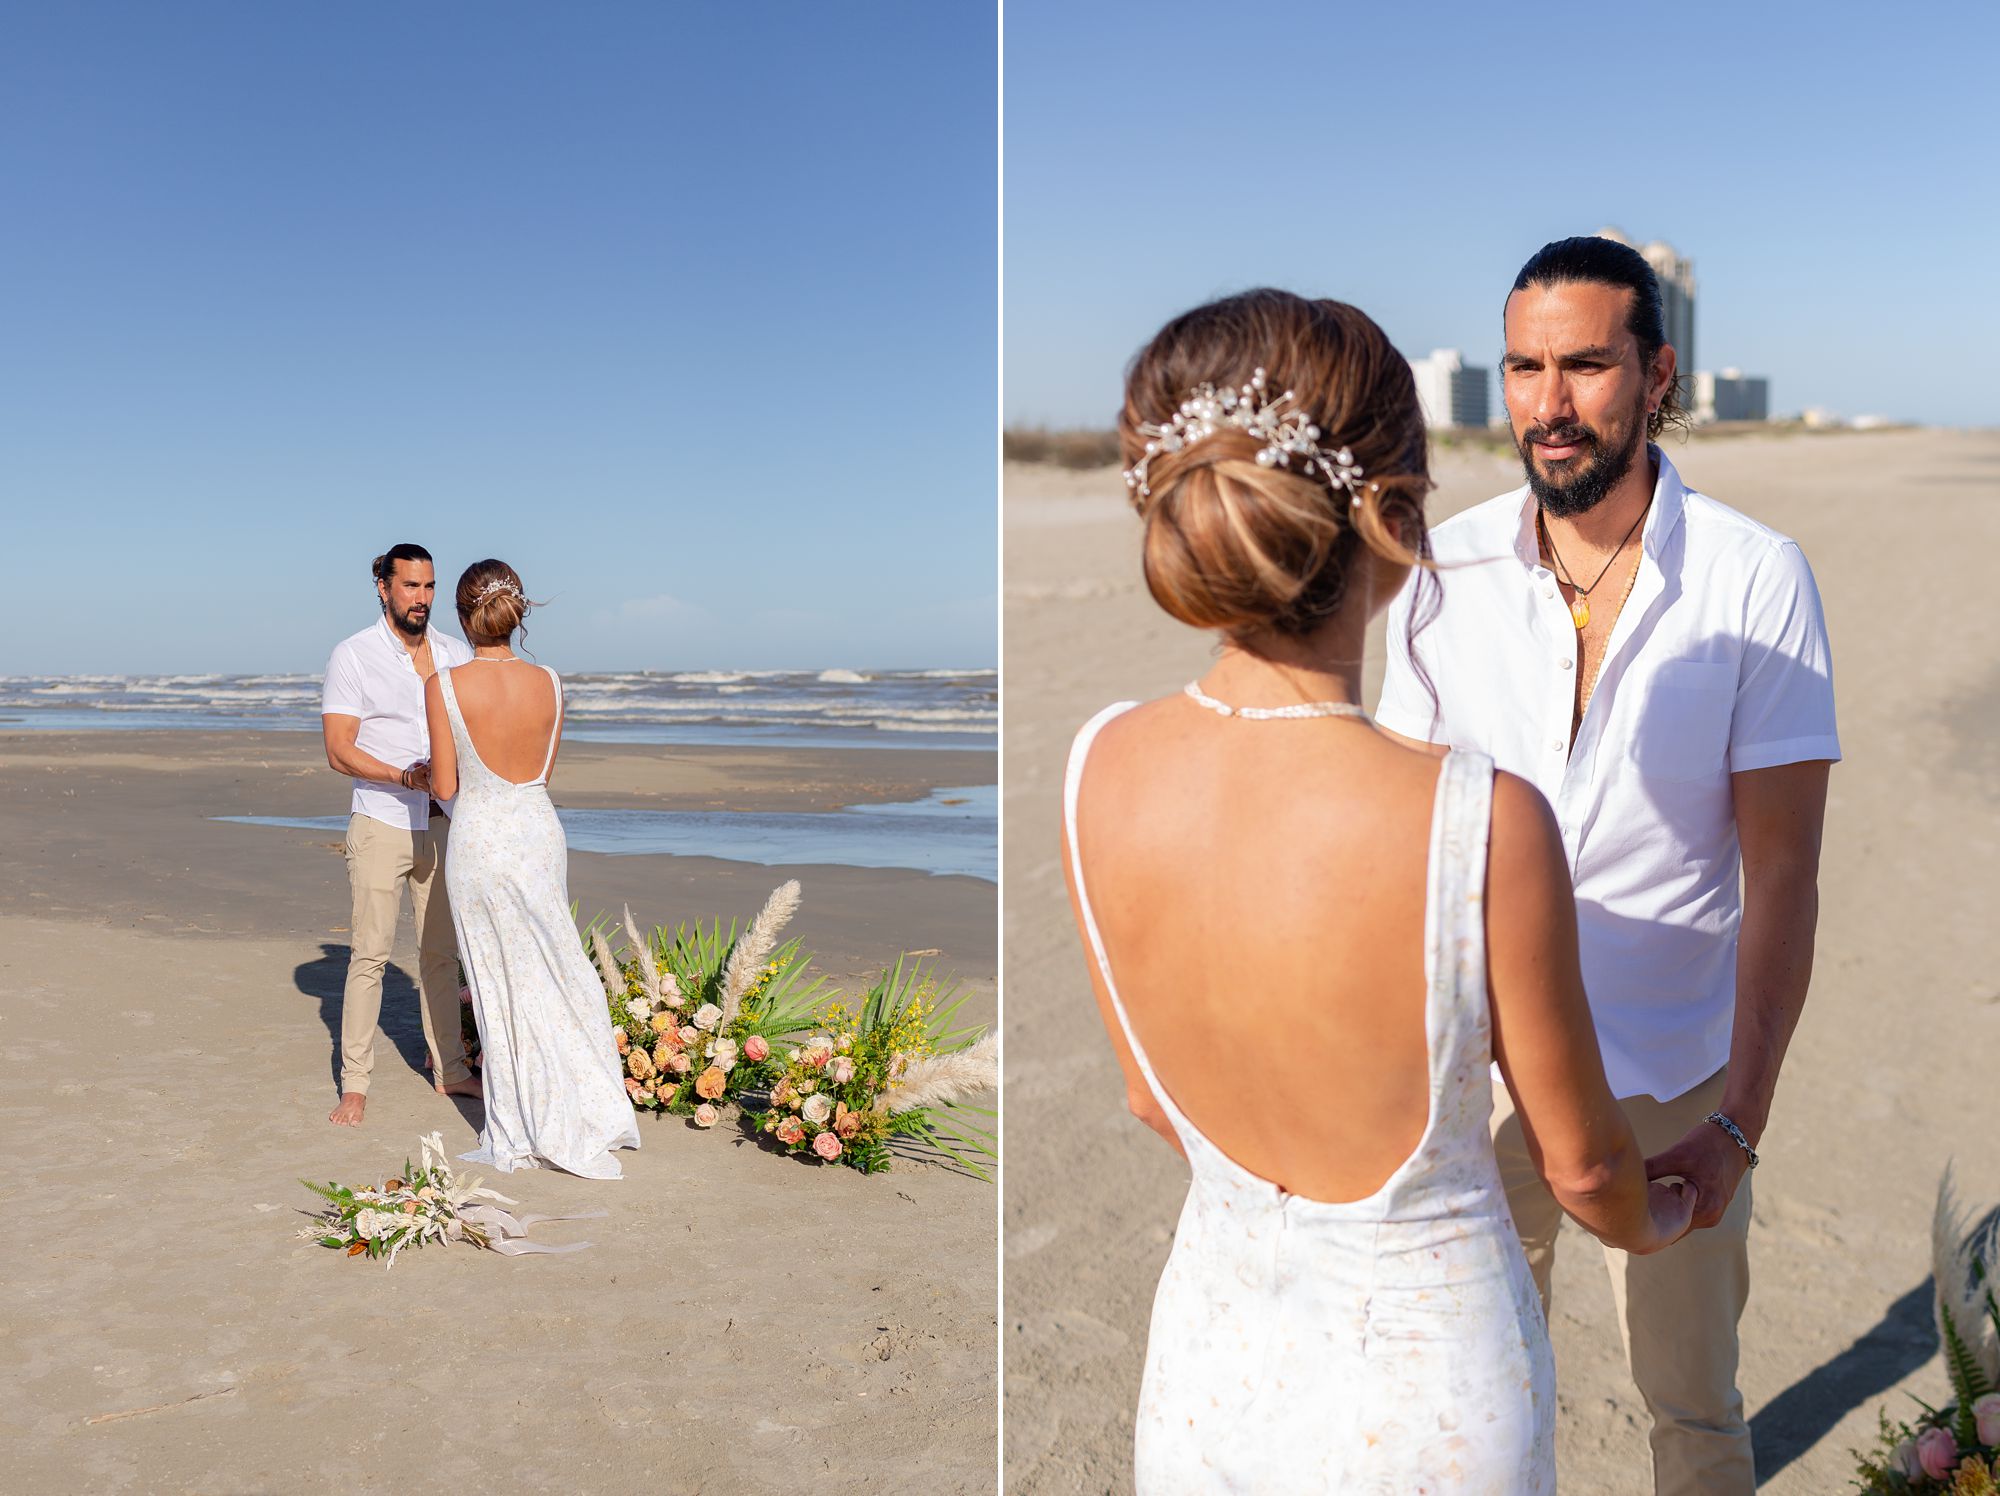 A bride and groom stand facing each other and holding hands in front of a ceremony flower arrangement on a Galveston beach.